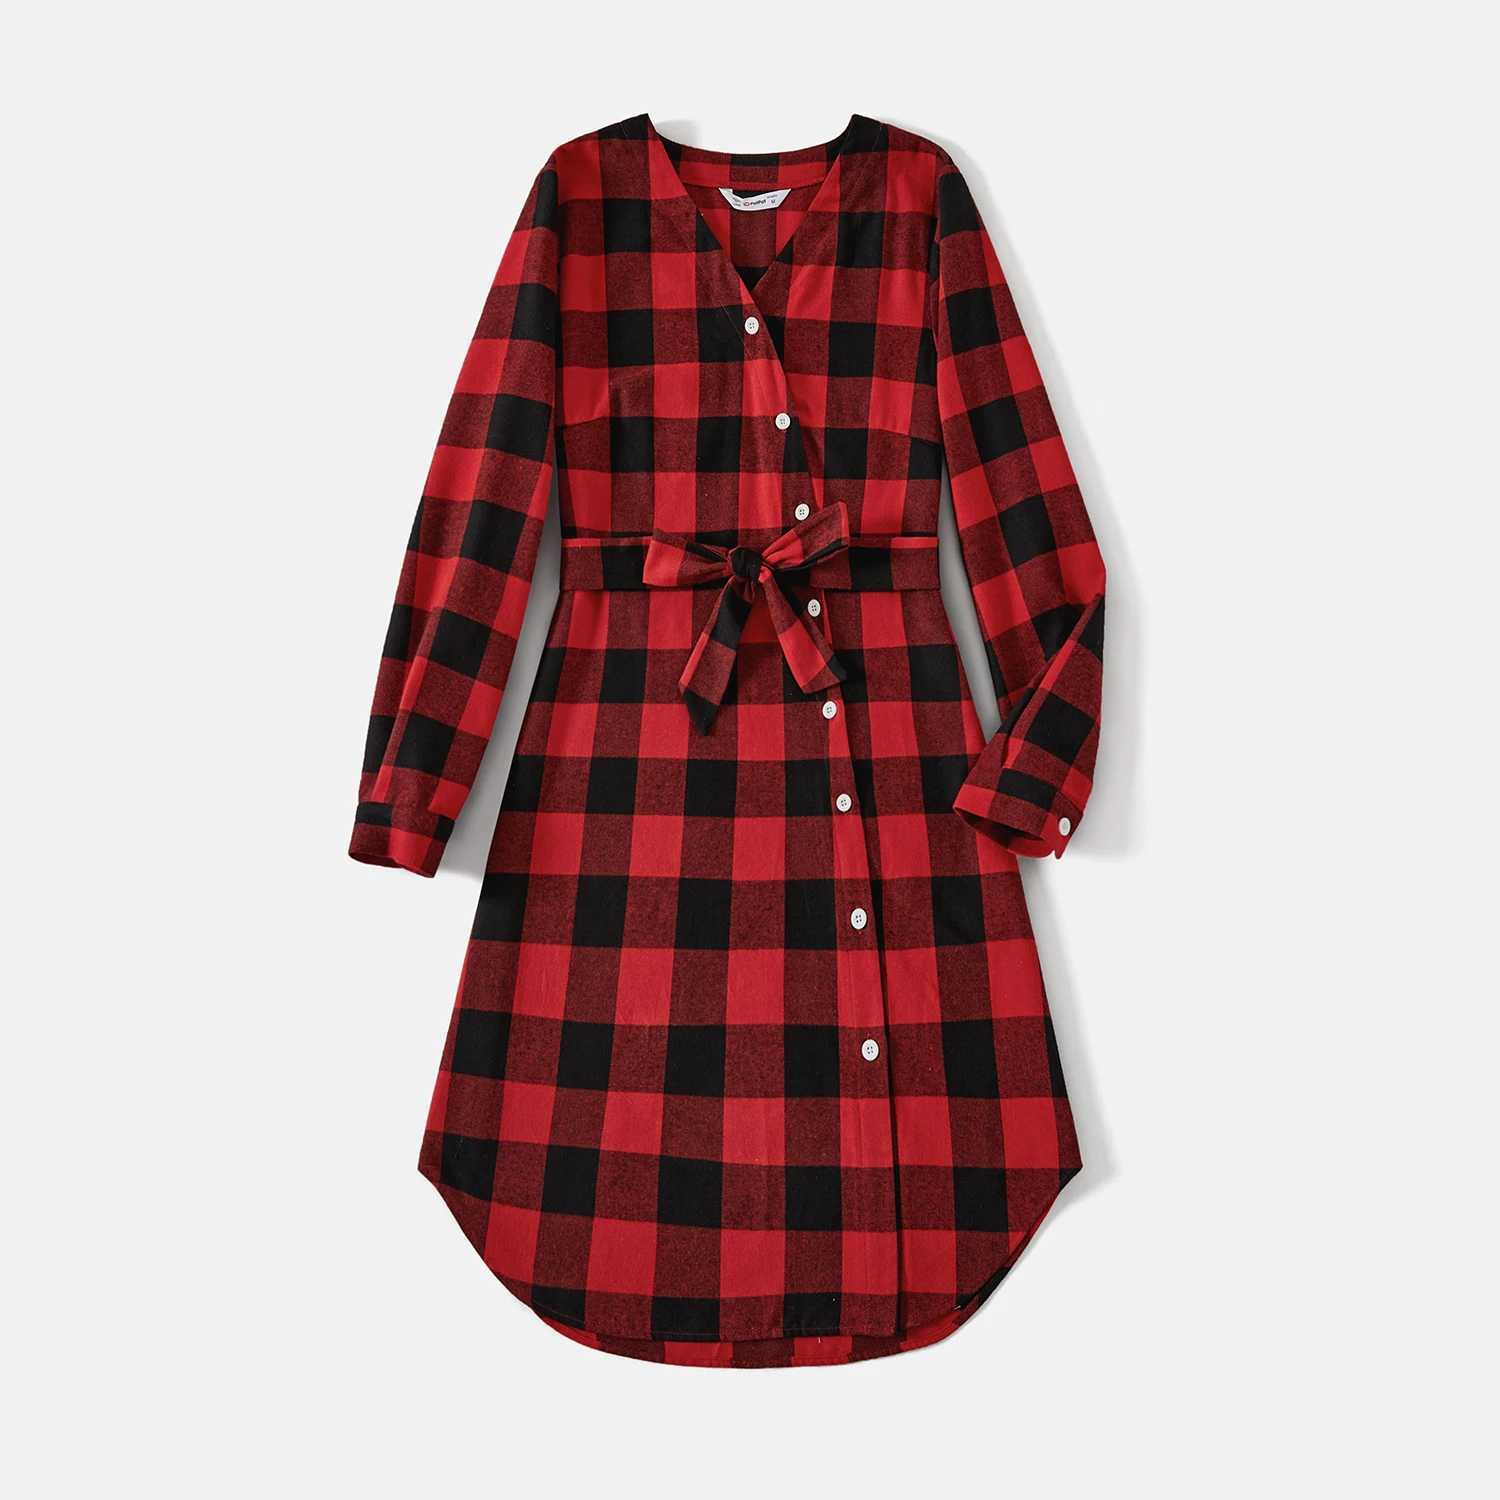 Family Matching Outfits Pa Christmas Family Matching Outfits Red and Black Plaid Long-sleeve Shirts and Belted Dresses Matching Family Clothes Sets